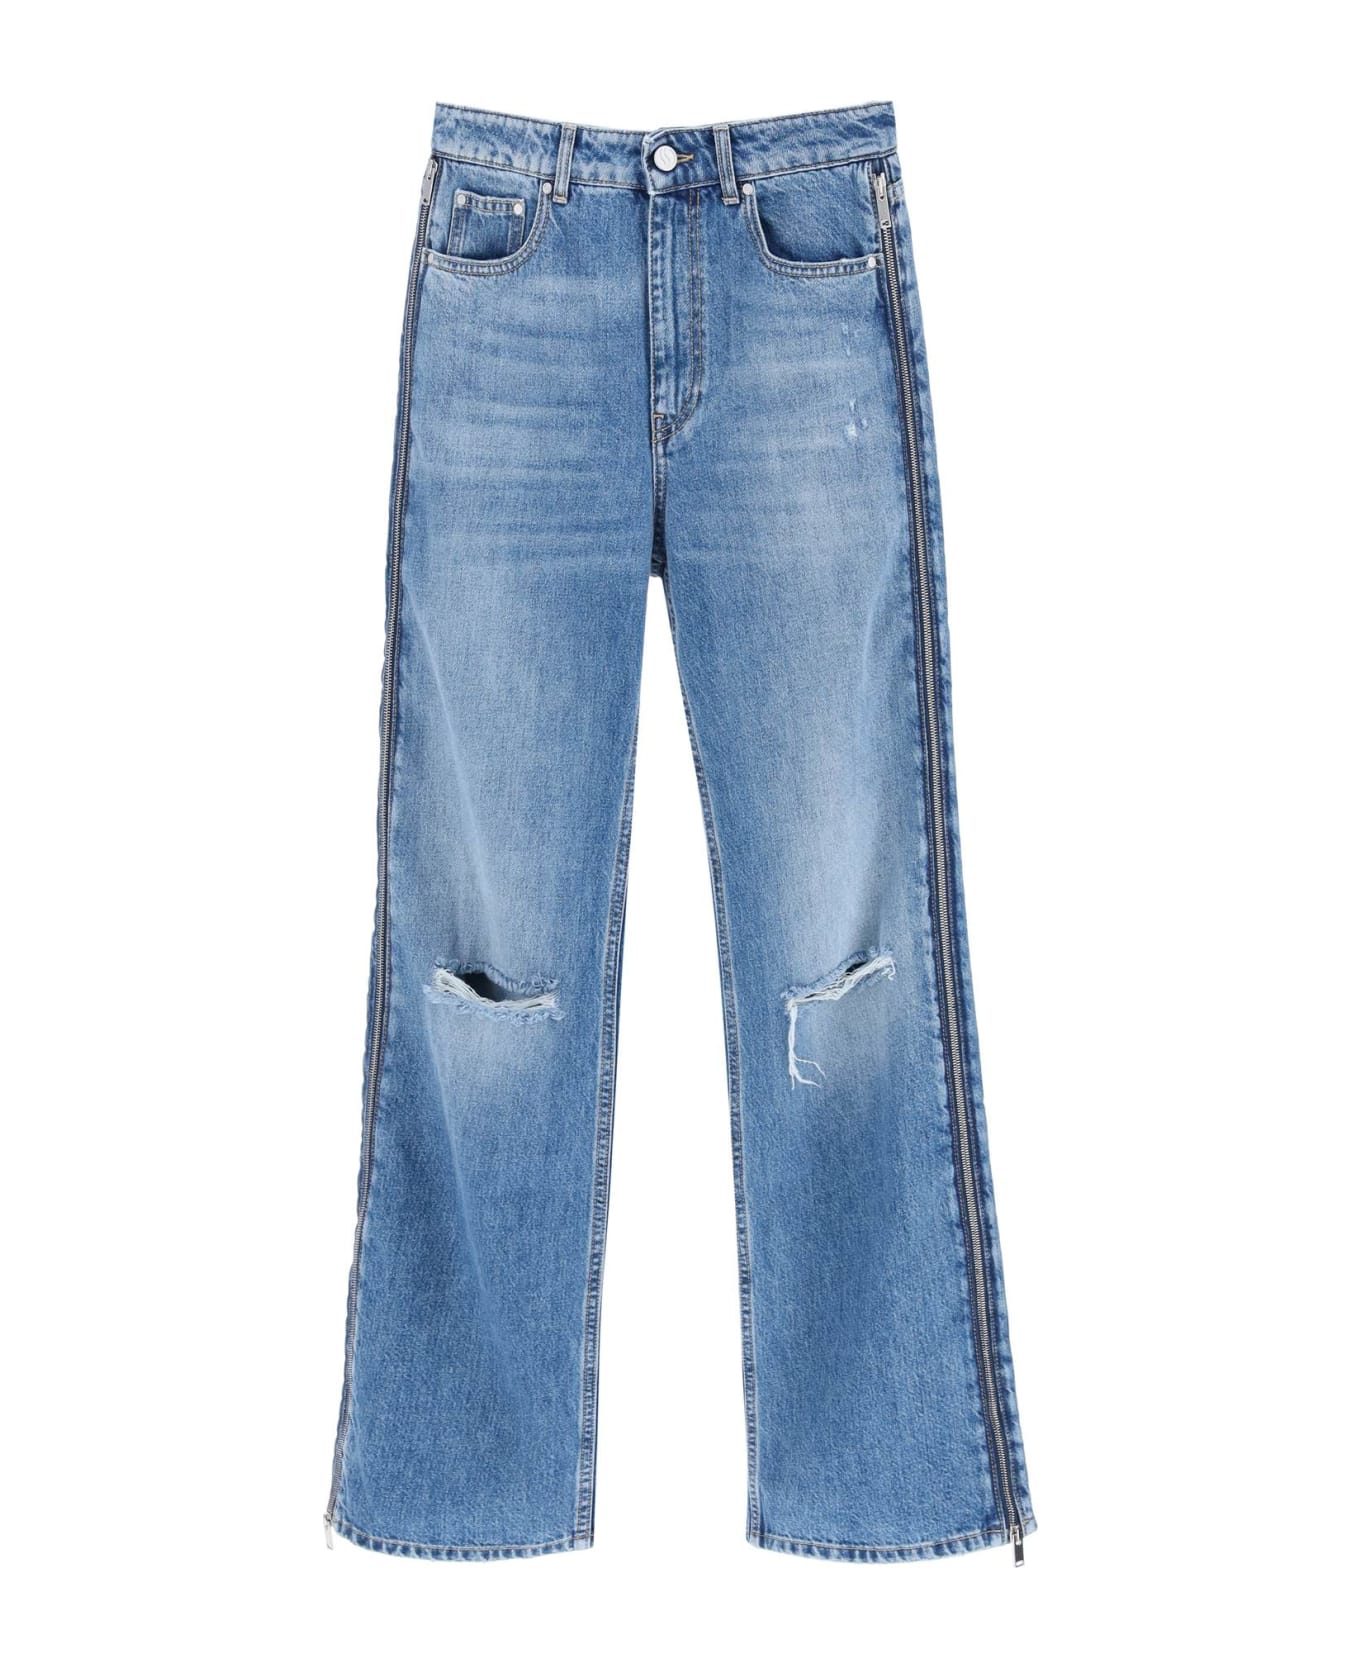 Stella McCartney Straight Leg Jeans With Zippers - MID BLUE (Blue)